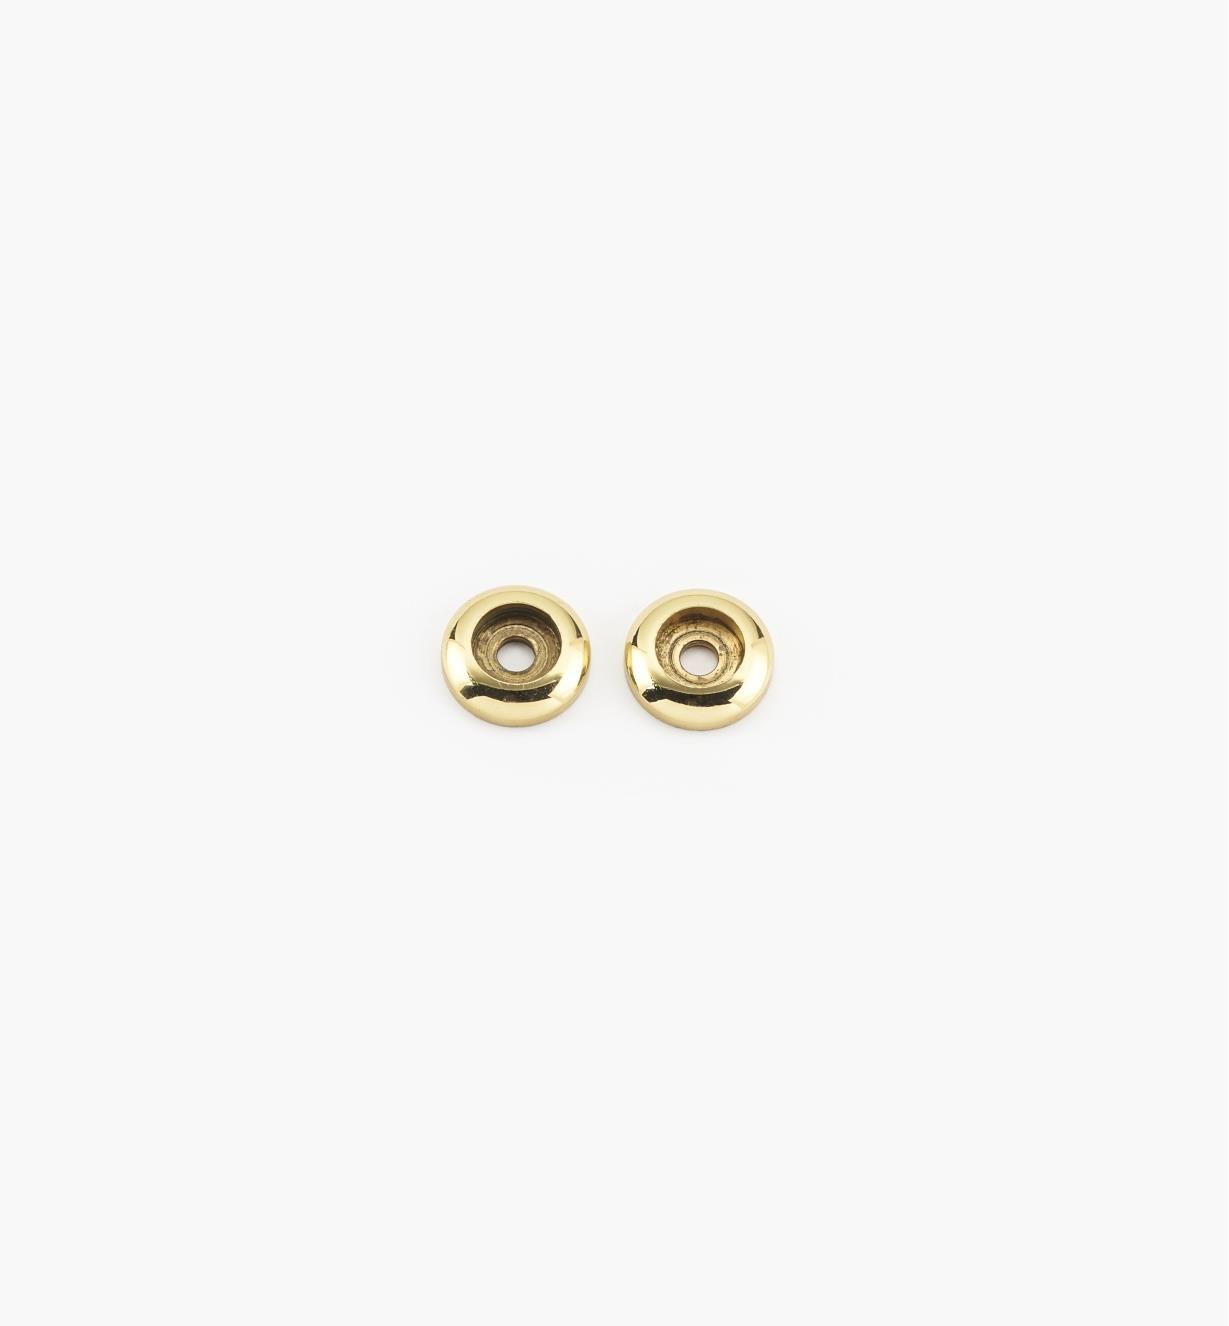 00W7810 - Polished Brass Handle Spacers, pair